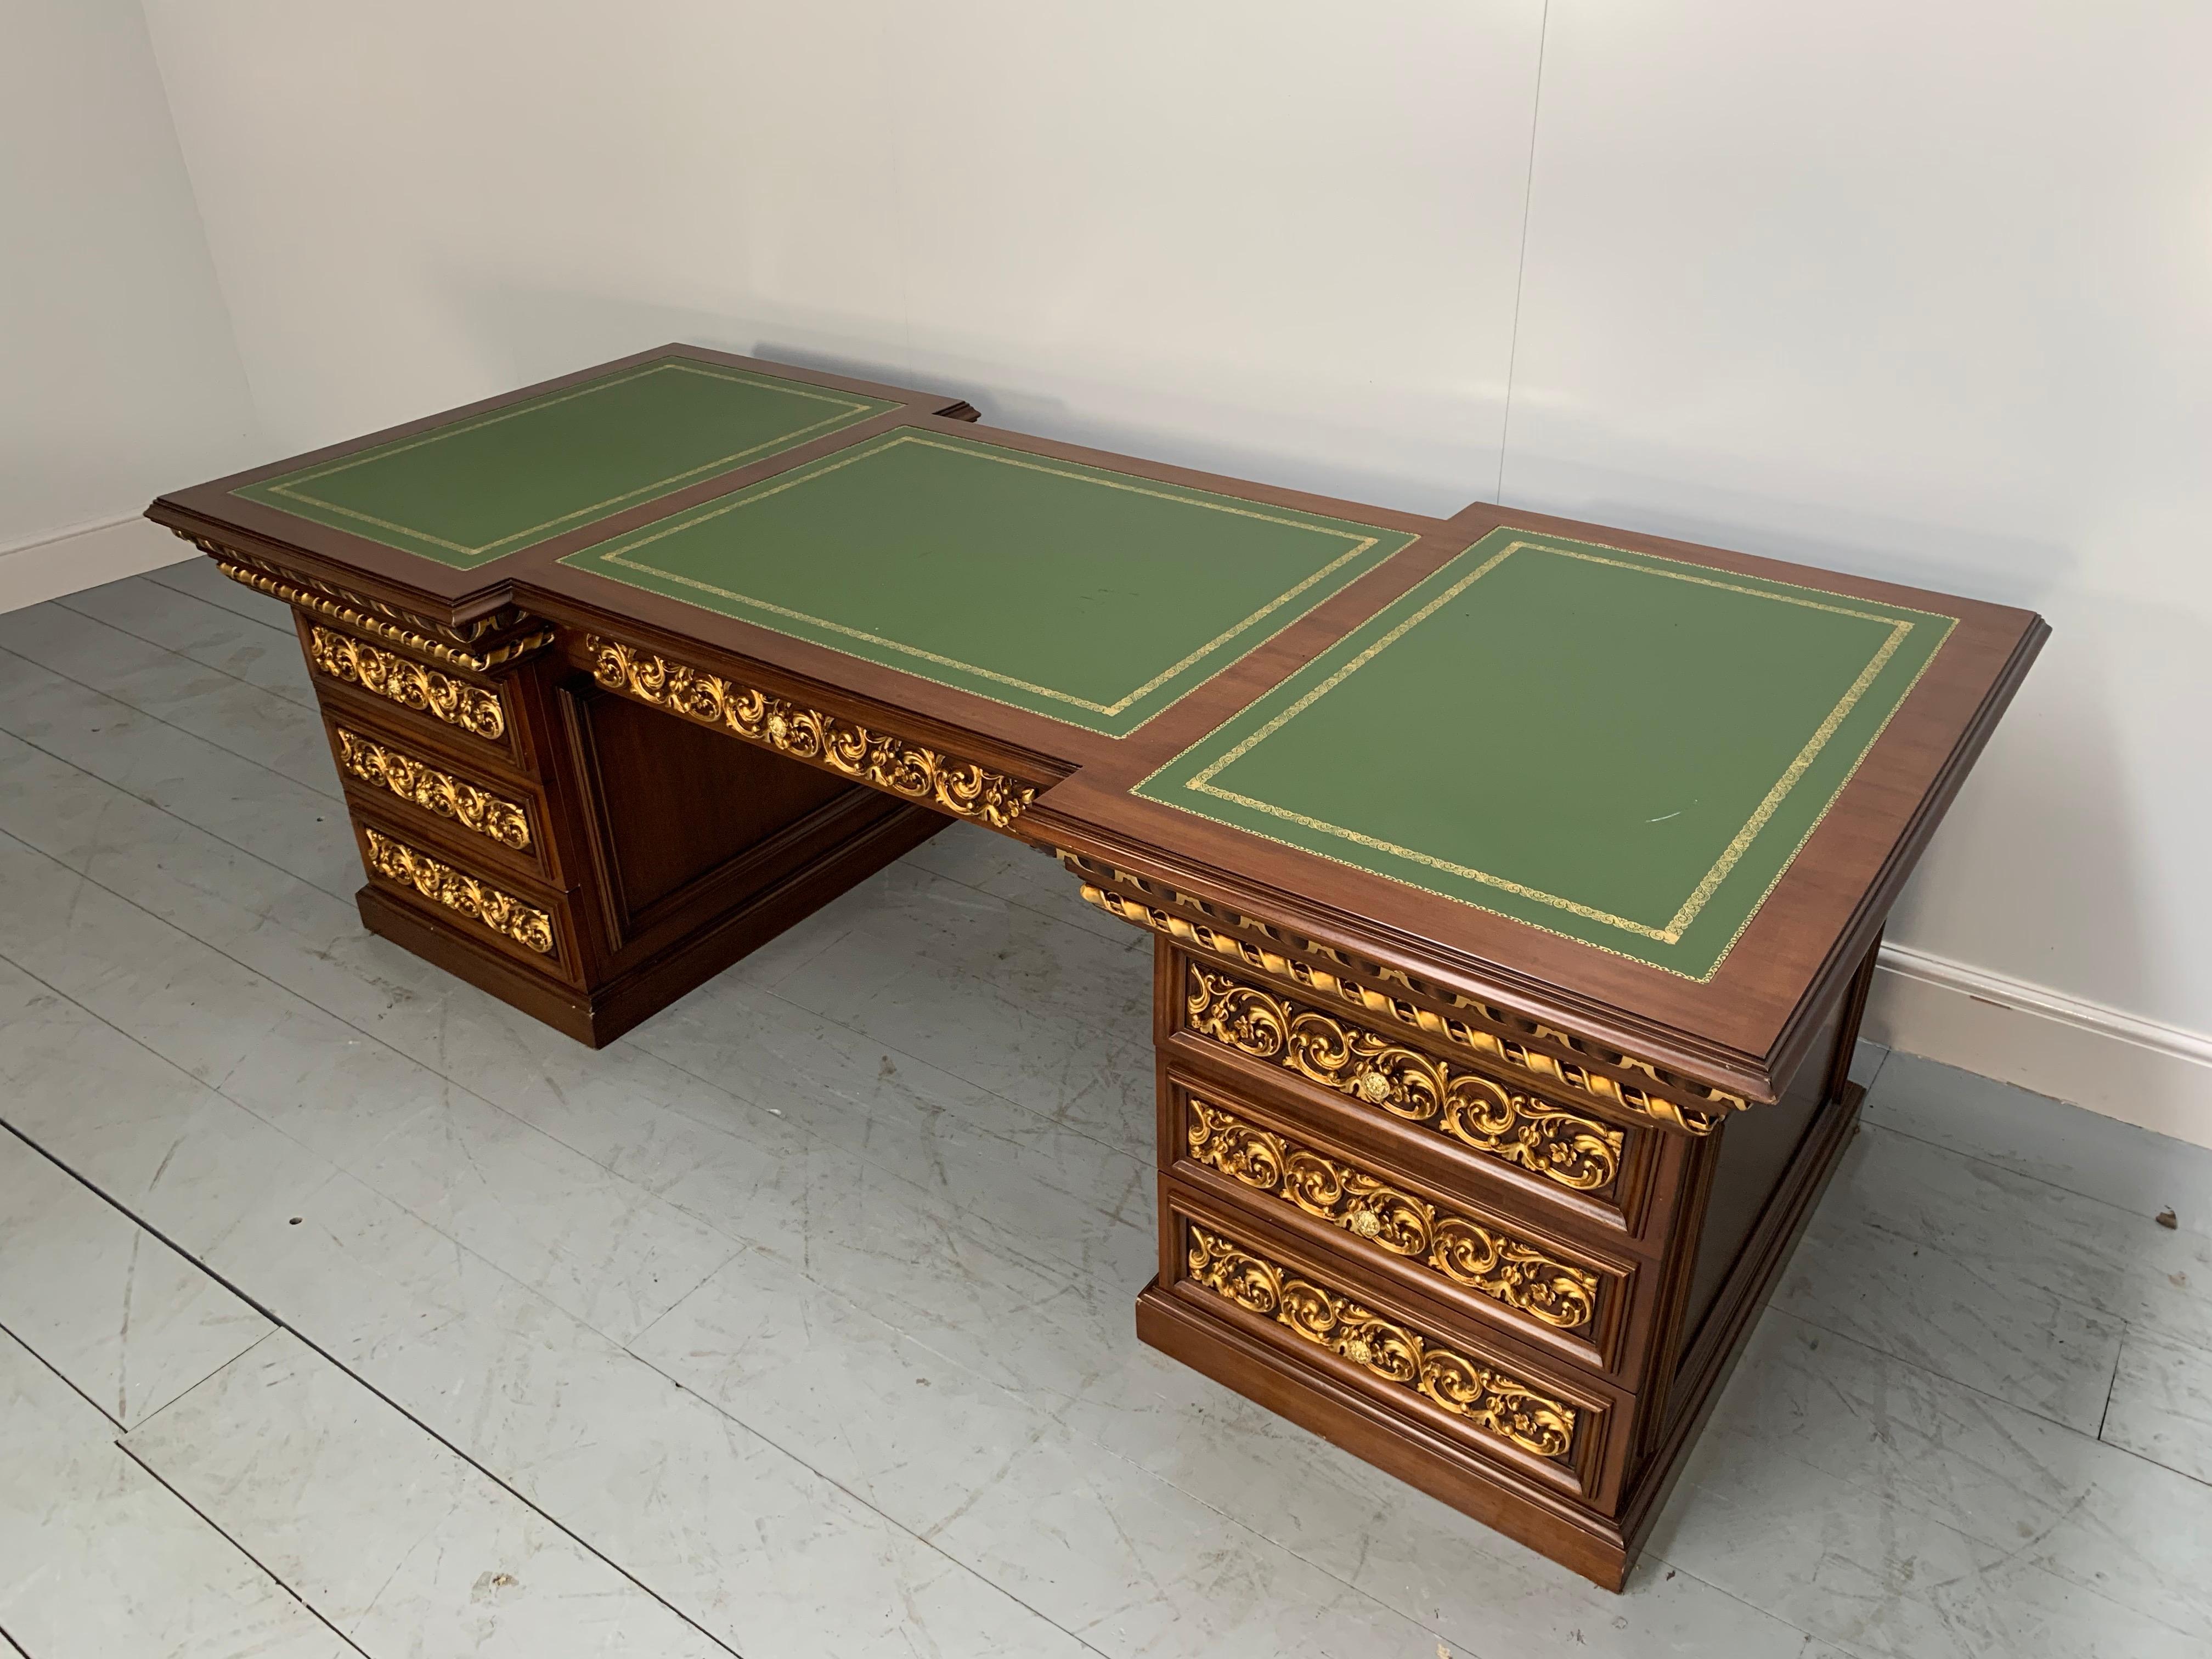 By choosing to view this listing, i can only assume you are familiar with the world-renown “Asnaghi” brand, and fully-understand the nature of what is on offer.

Asnaghi make pieces of furniture that are far more than just that. They create real